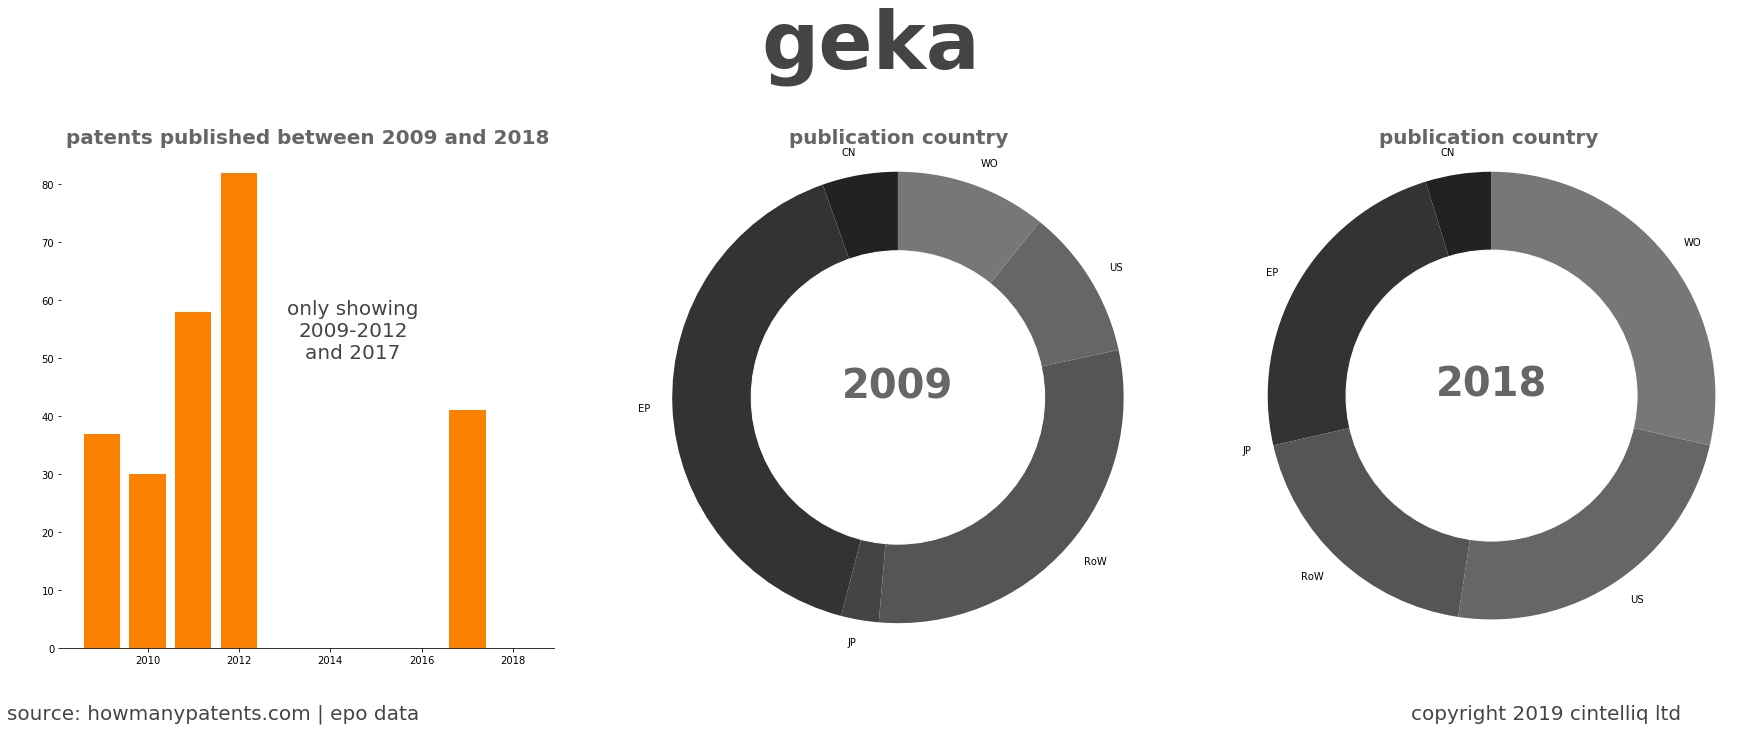 summary of patents for Geka